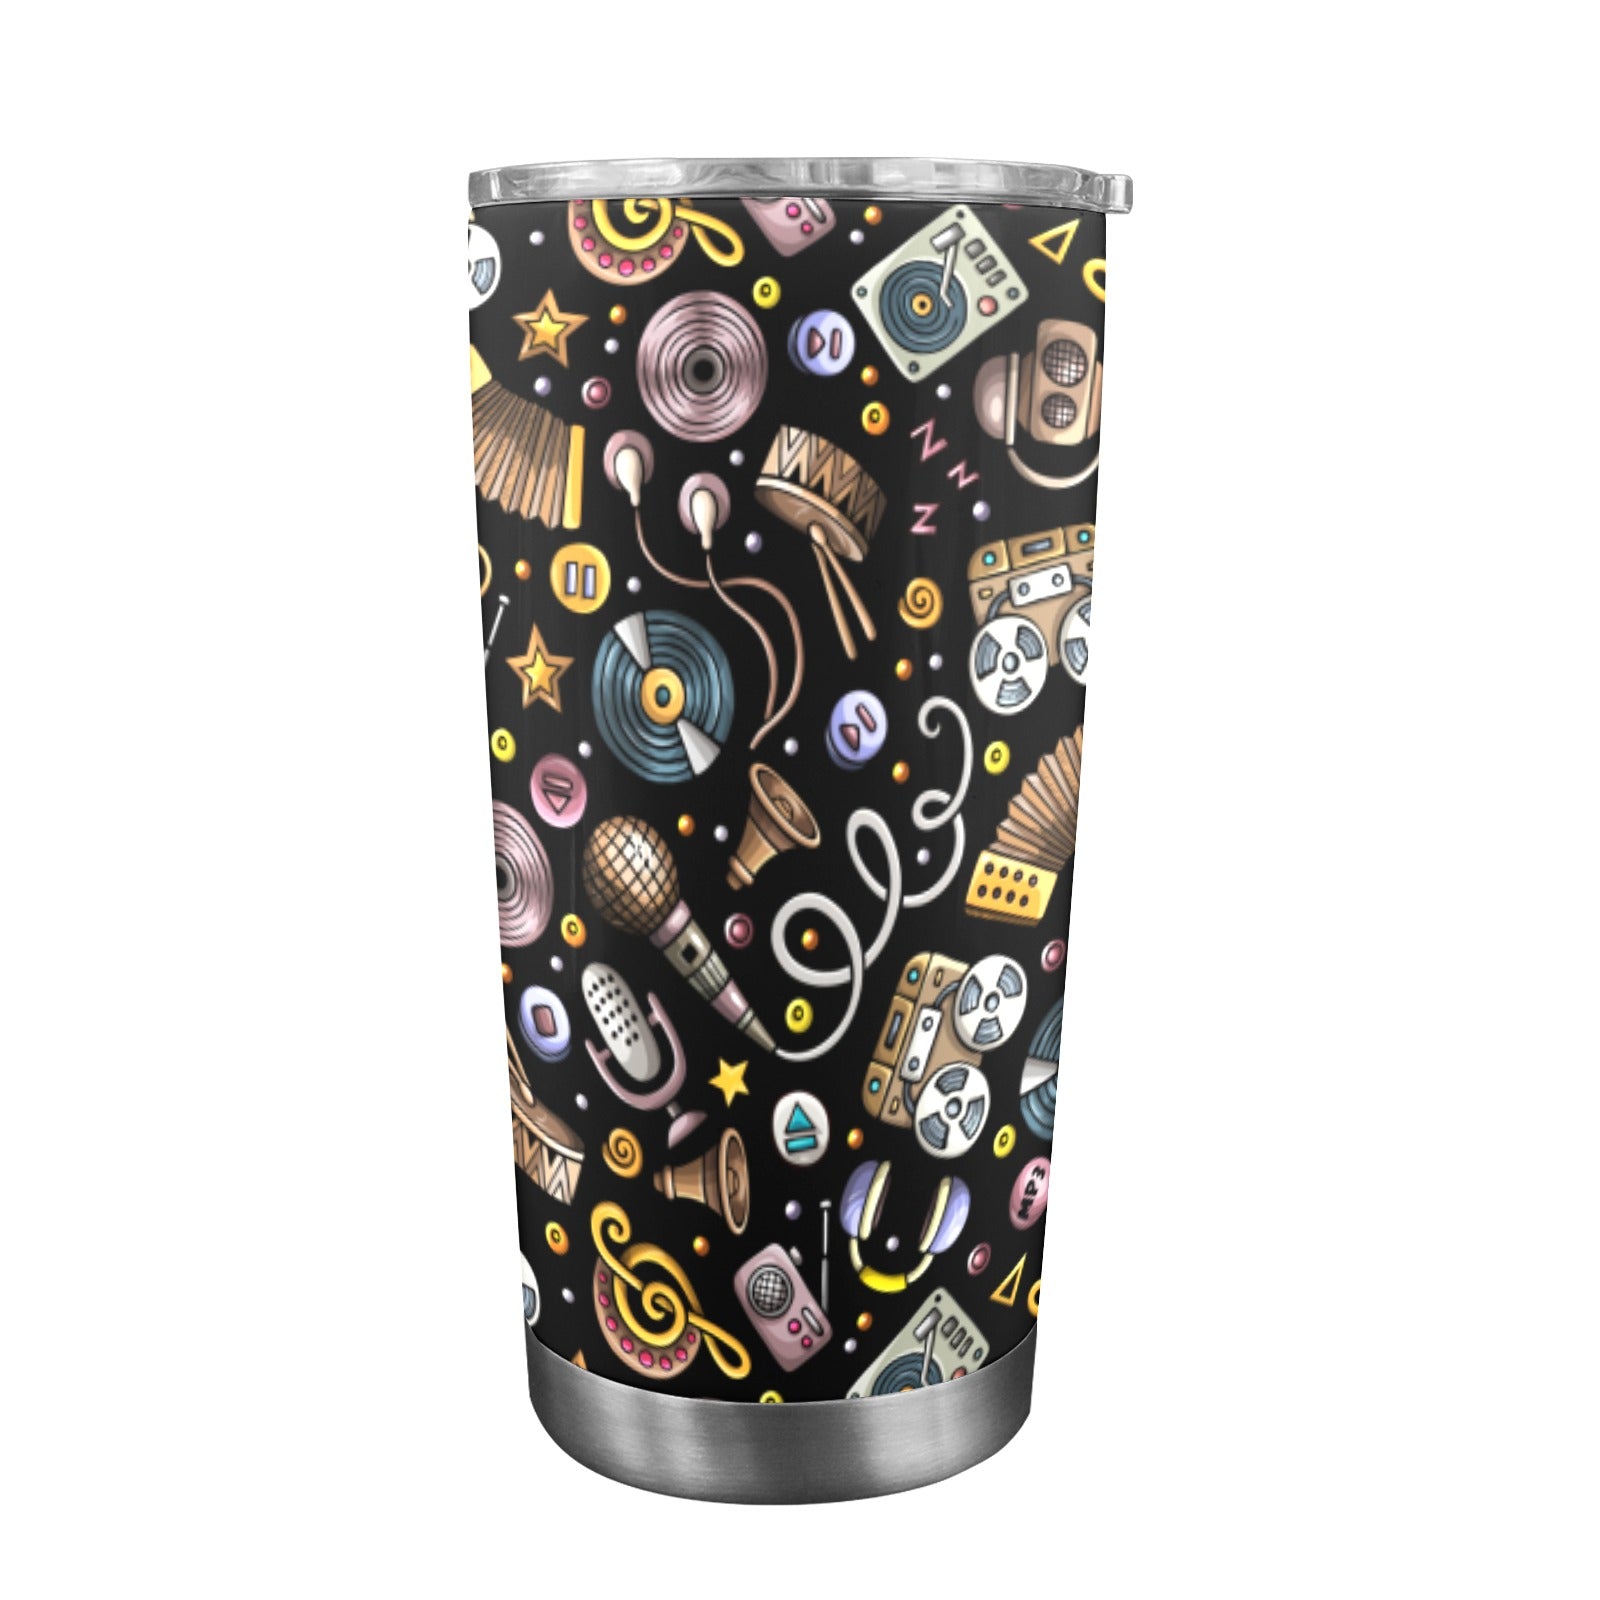 Retro Music Mix - 20oz Mobile Tumbler with Clear Slide Lid Clear Lid Travel Mug Music